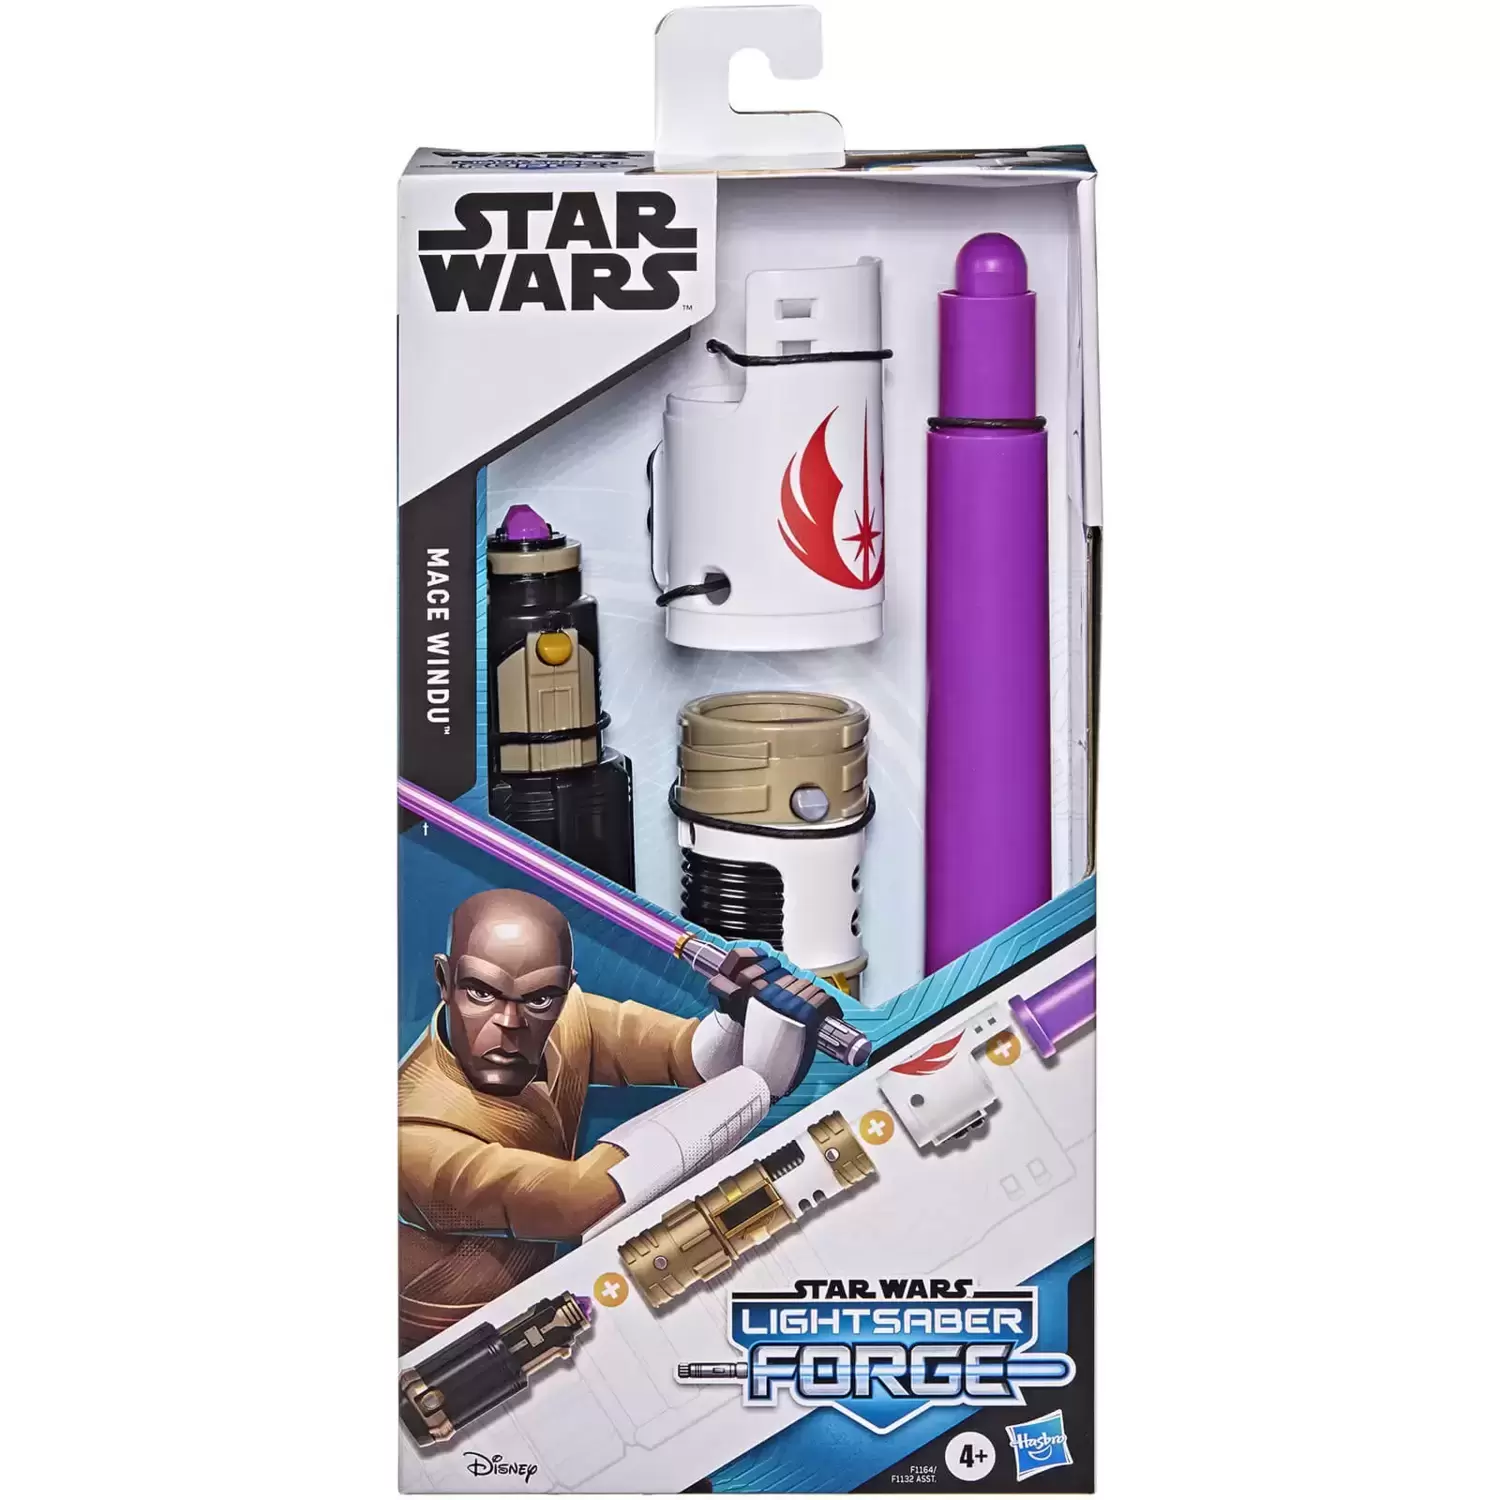 Lightsabers And Roleplay Items - Lightsaber Forge - Mace Windu